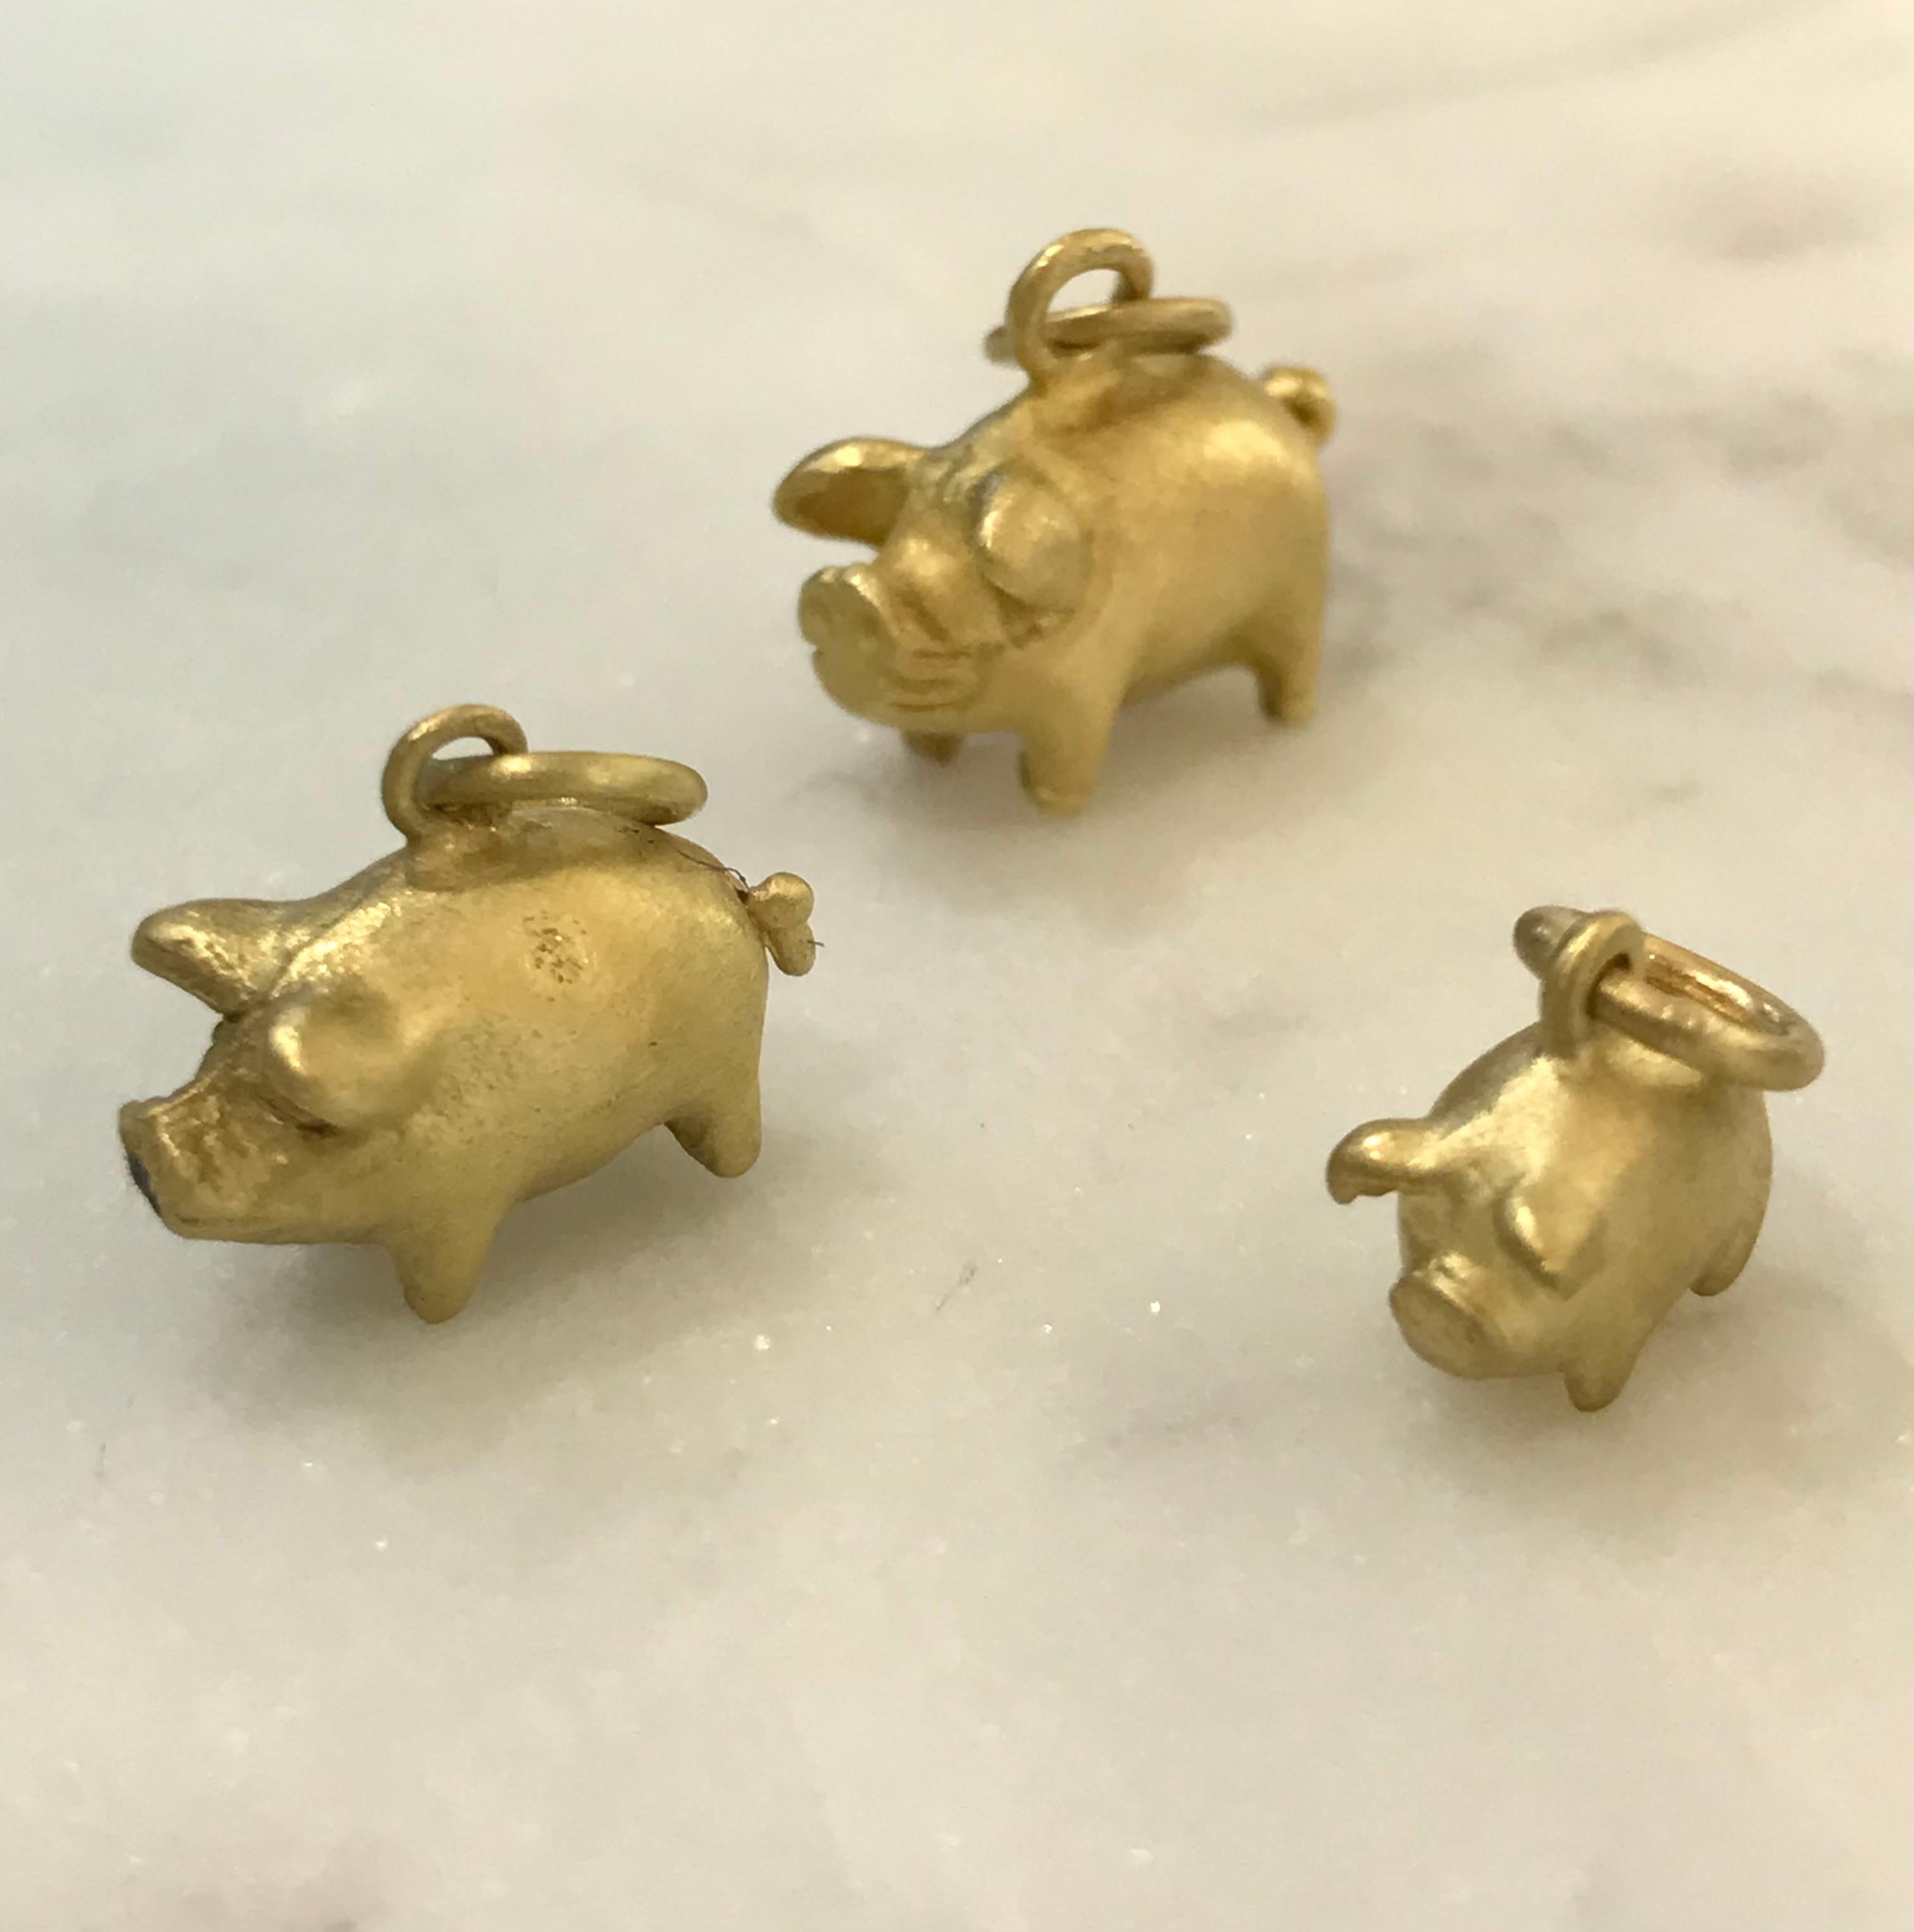 3 little pigs! Faye Kim's solid 18K gold* pig charms symbolize knowledge and good fortune. Available in 3 sizes (small, medium and large).

*Faye Kim's signature green gold is comprised of 75% pure gold and 25% silver.

Small Length 10mm -